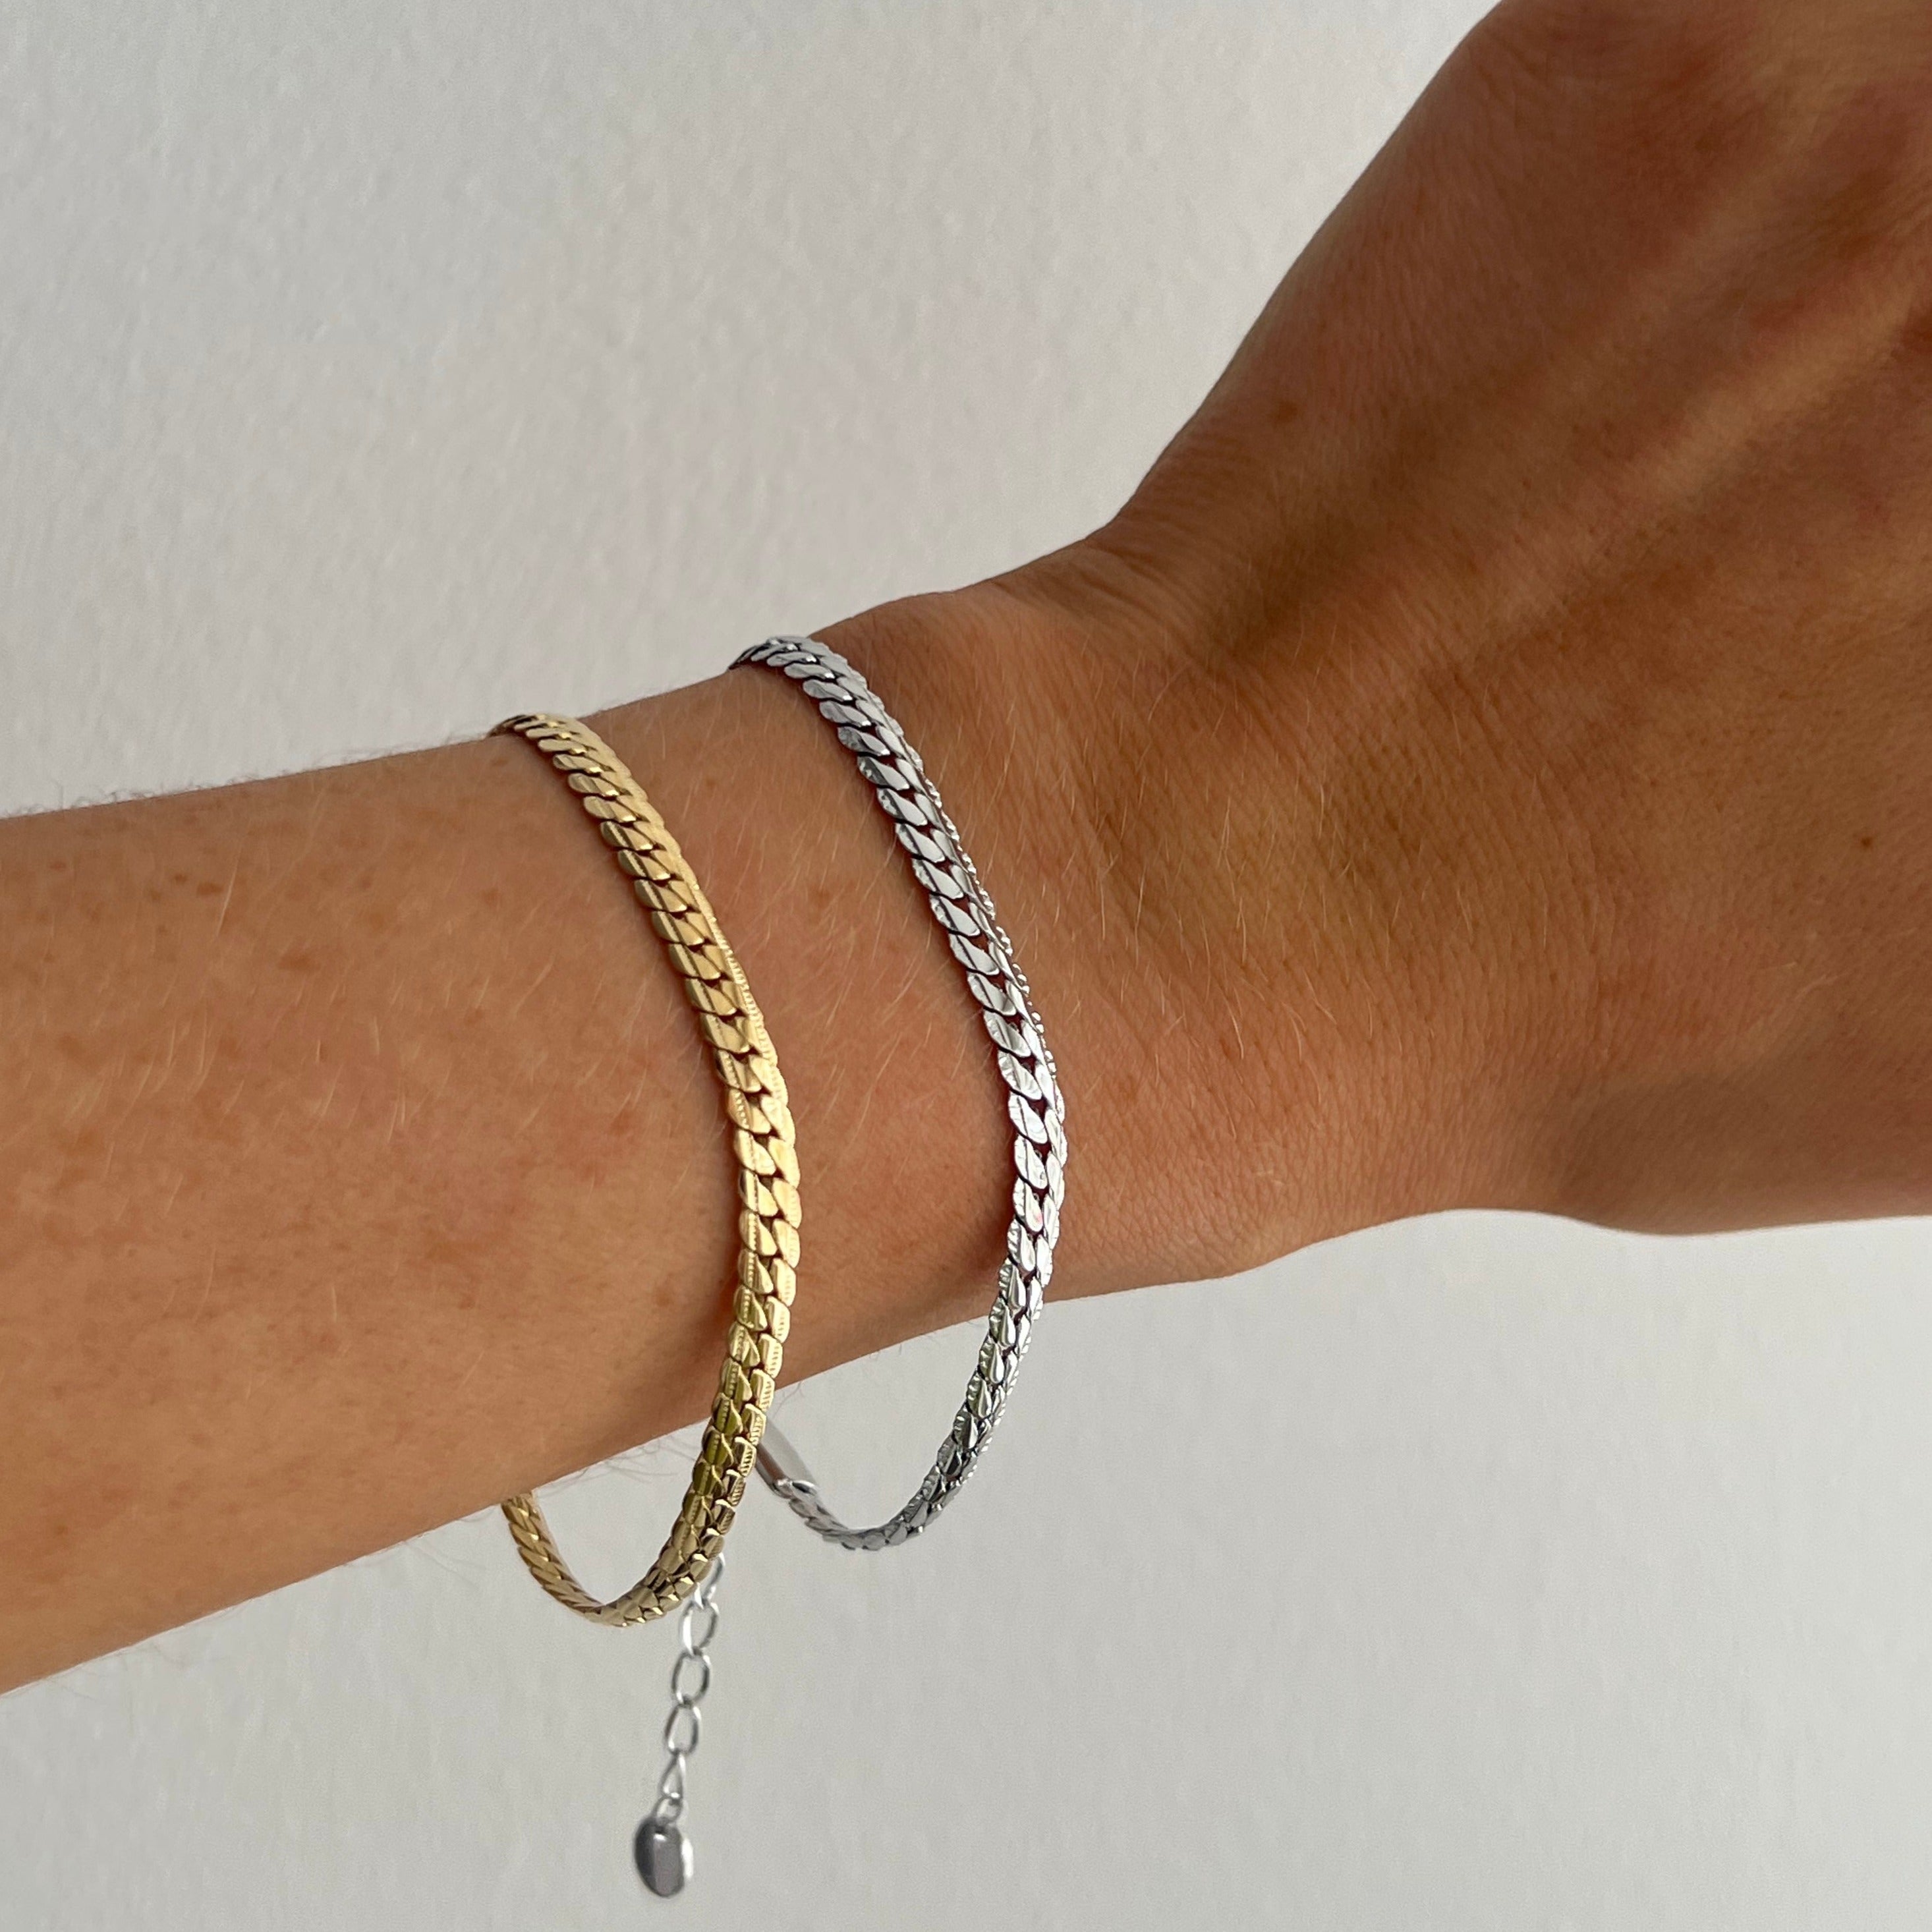 Introducing our Cable Dainty Bracelet. High Quality Stainless Steel. Tarnish Free Waterproof 19cm & adjustable.